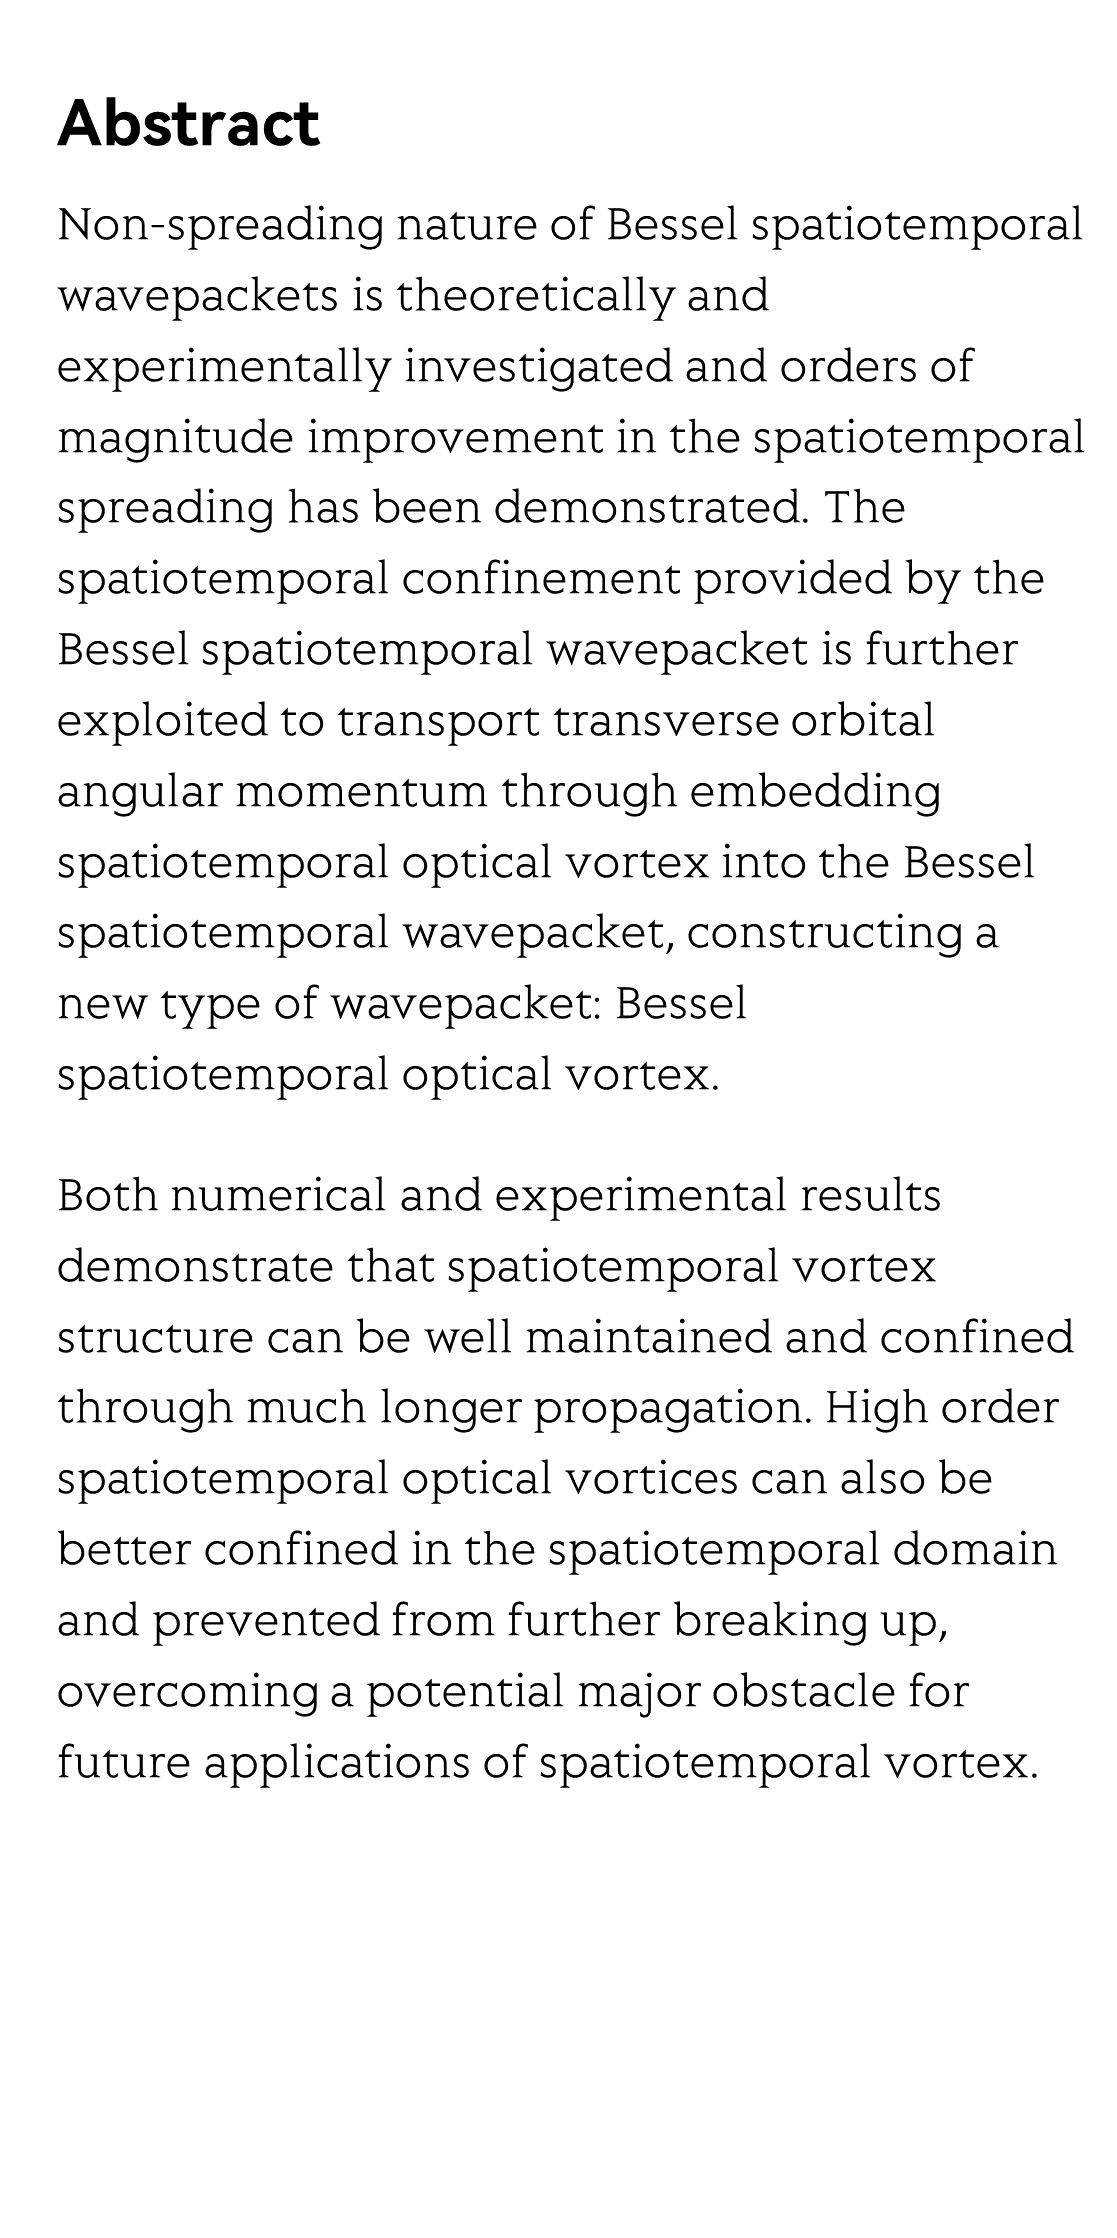 Non-spreading bessel spatiotemporal optical vortices_2